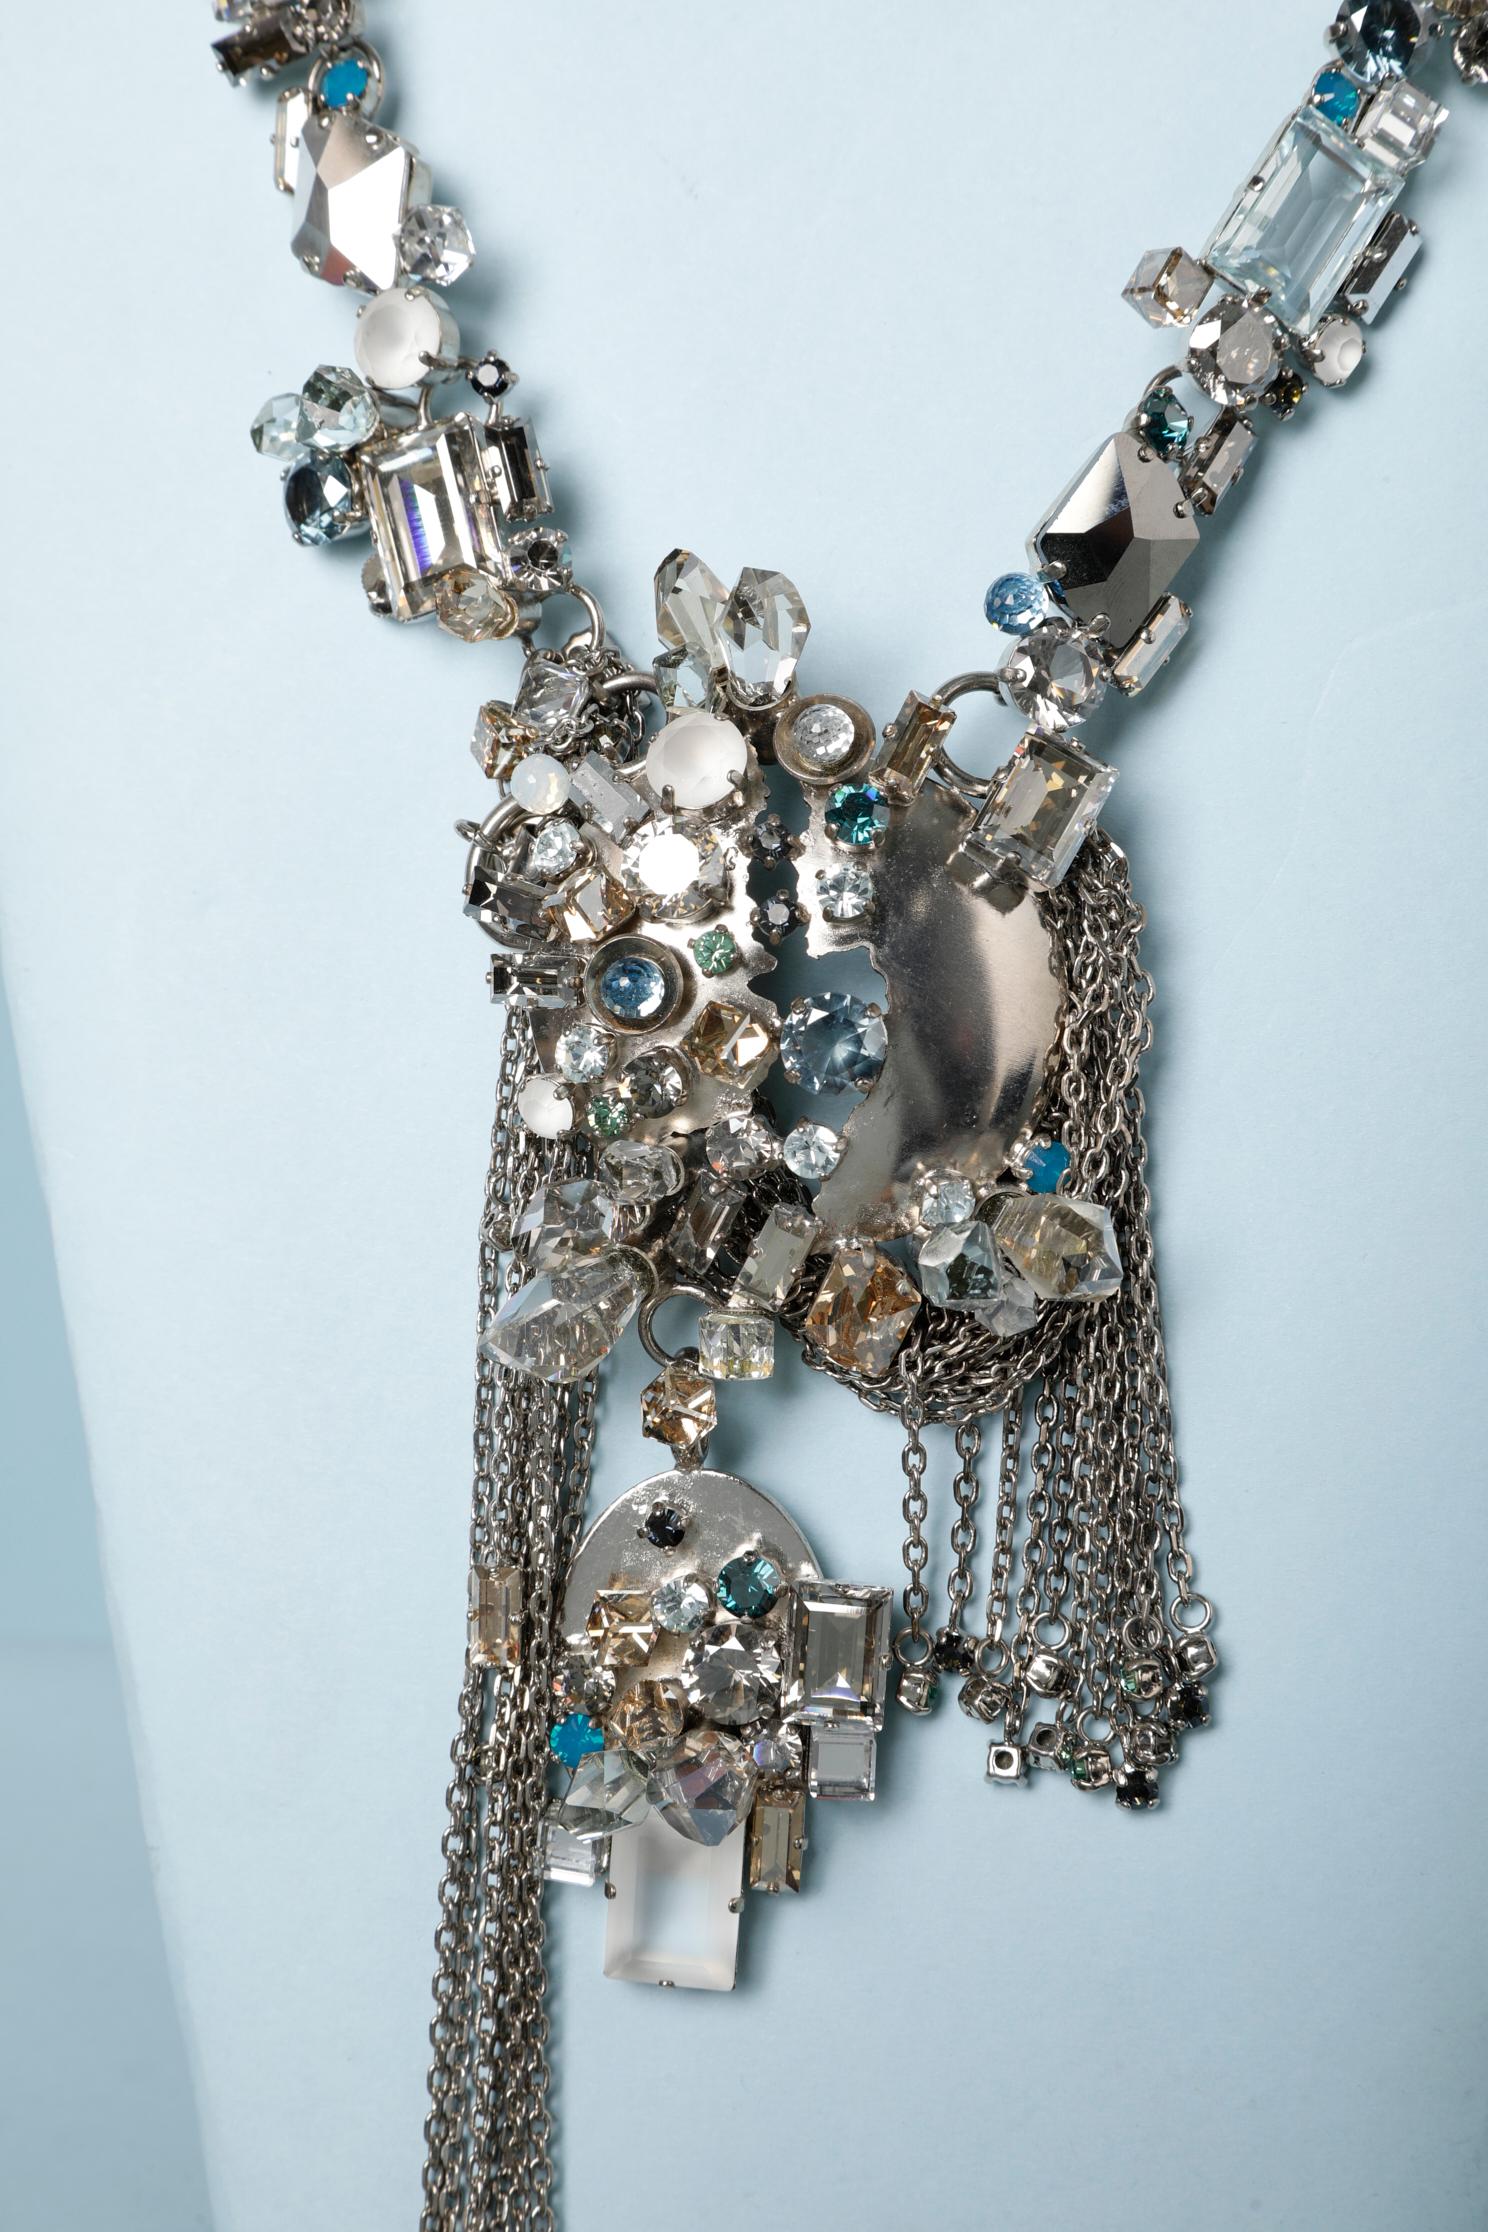 Drop necklace made of metal, chain, rhinestone and glass beads. Maximum lenght around the neck = 45cm but adjustable 